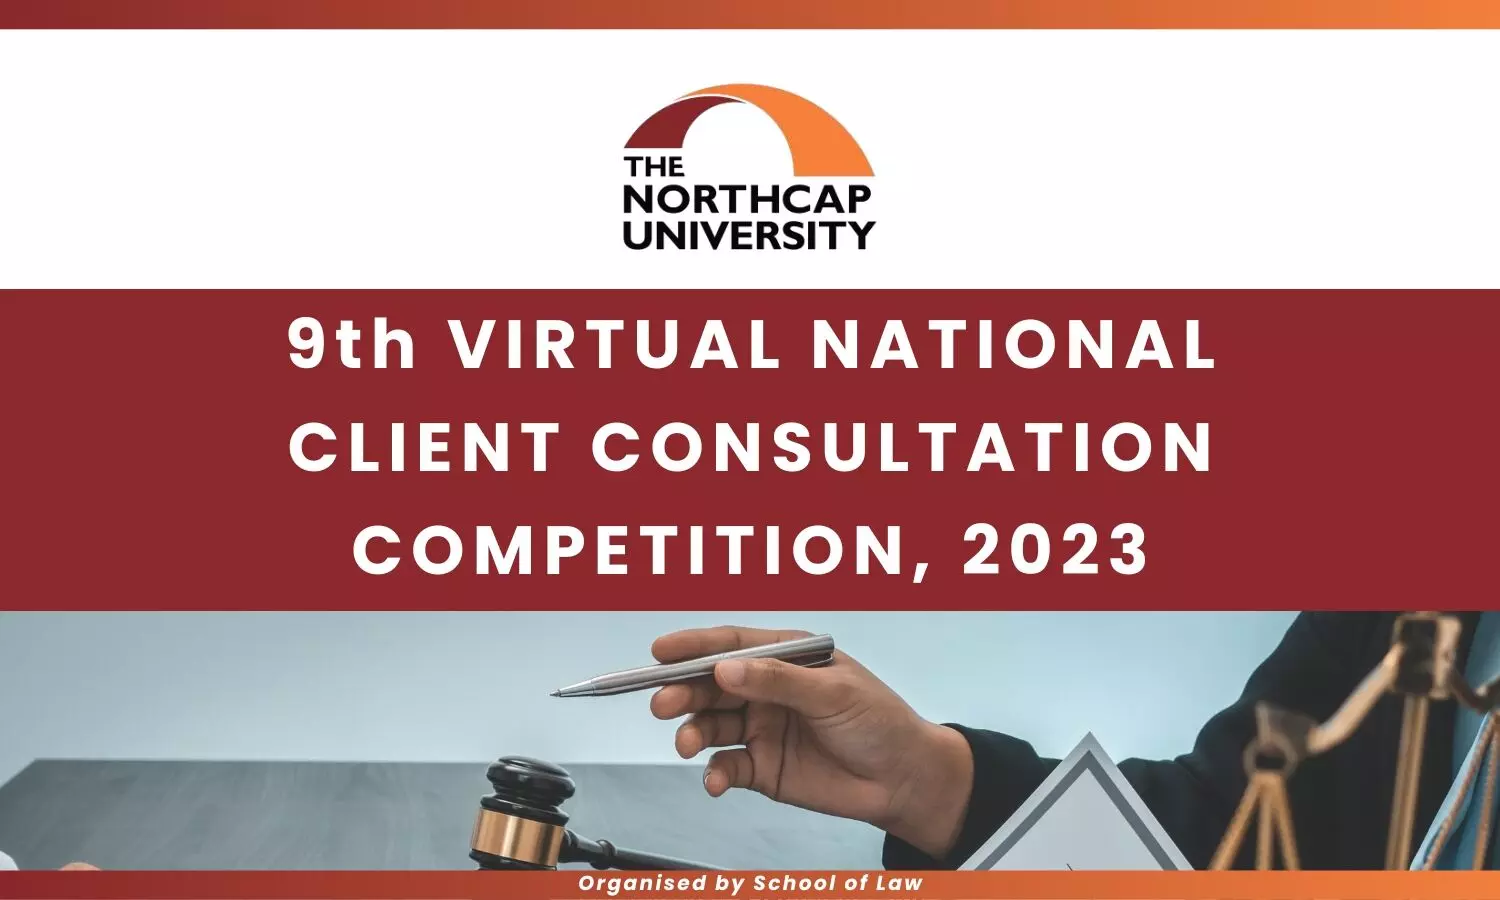 9th VIRTUAL NATIONAL CLIENT CONSULTATION COMPETITION, 2023